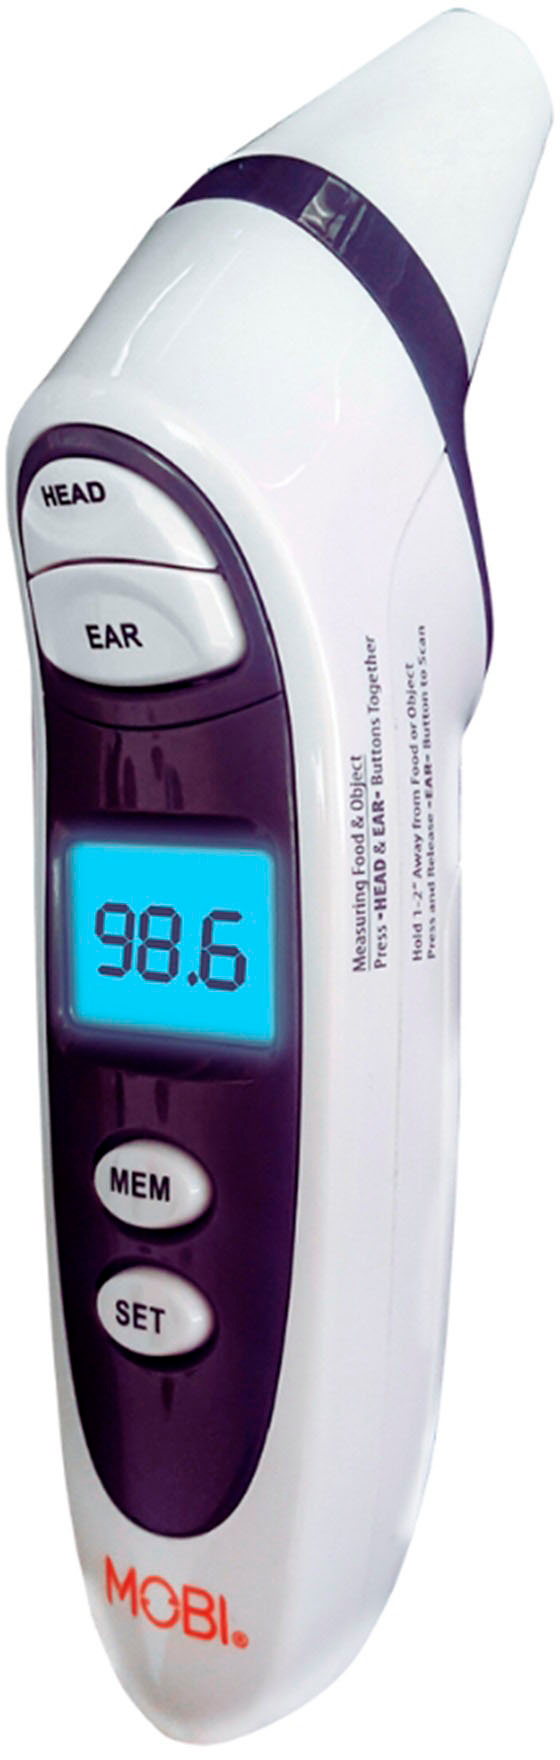 MOBI DualScan Prime Health Thermometer with Fever Indicator for